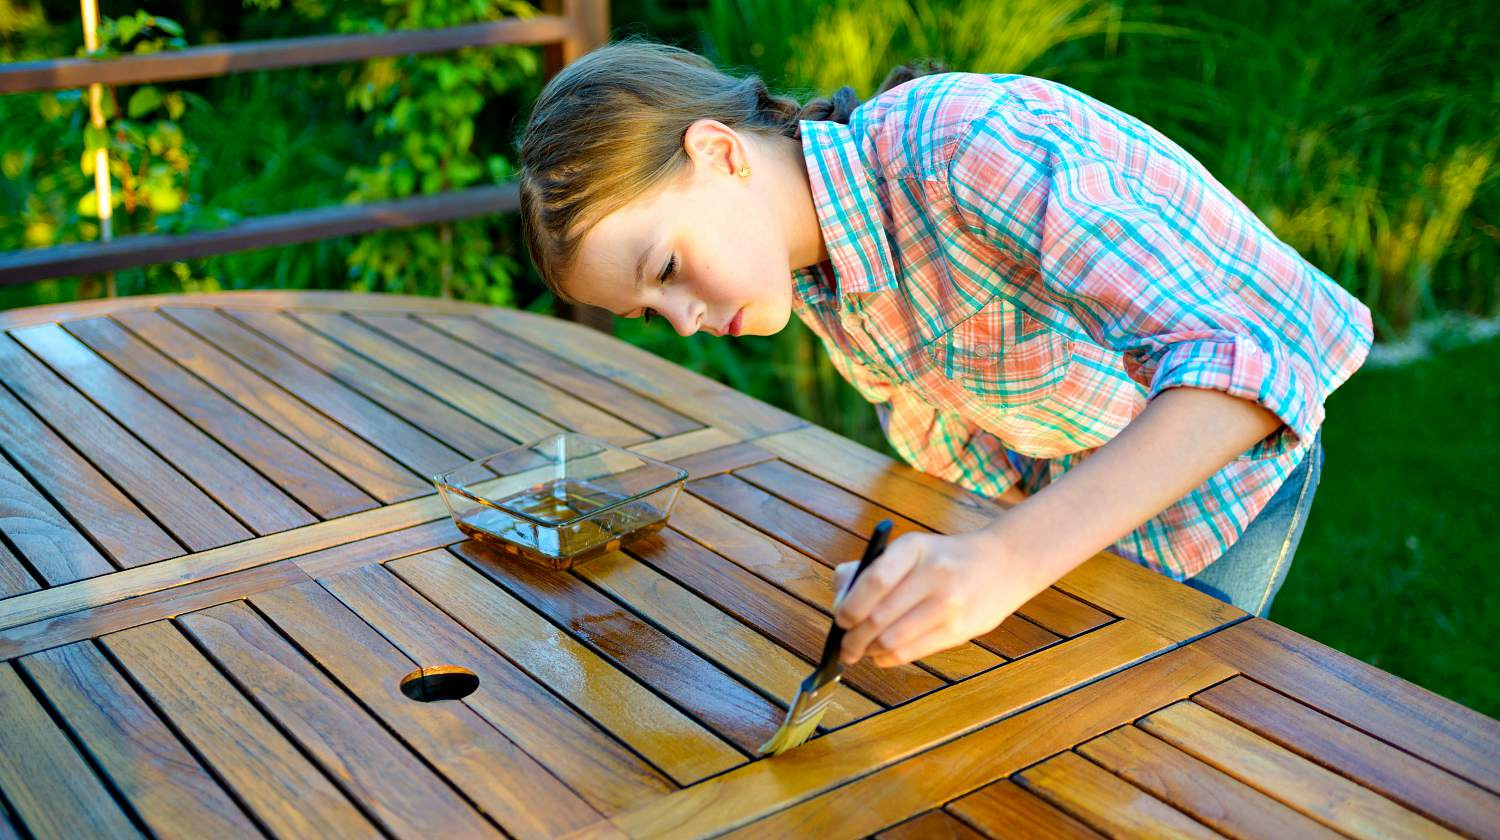 DIY Wood Projects For Kids
 Easy Woodworking Projects for Kids to Make